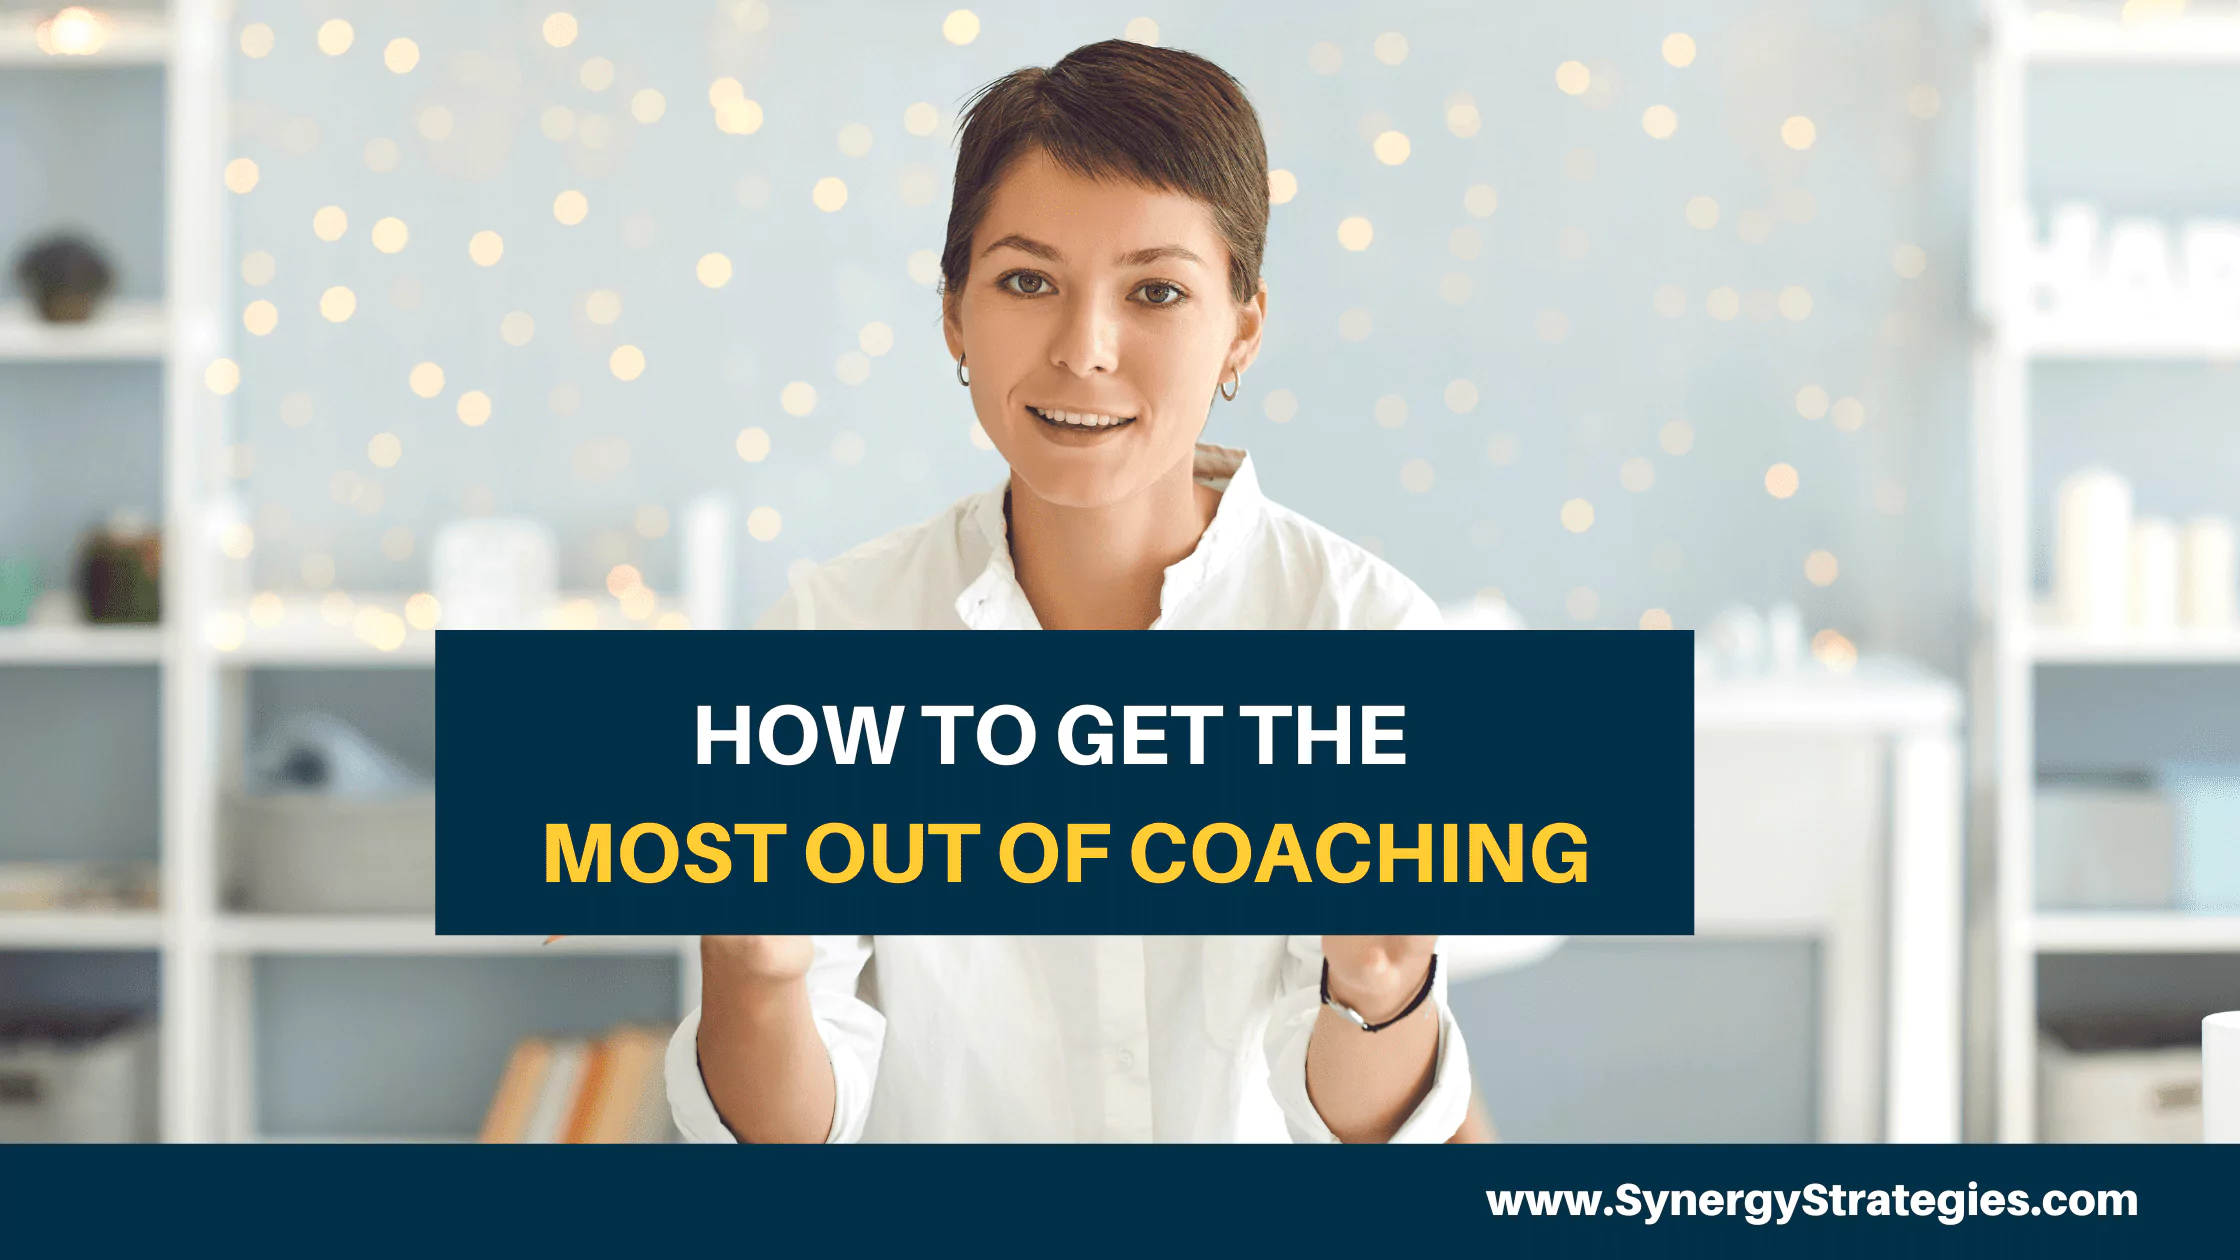 HOW TO GET THE MOST OUT OF COACHING